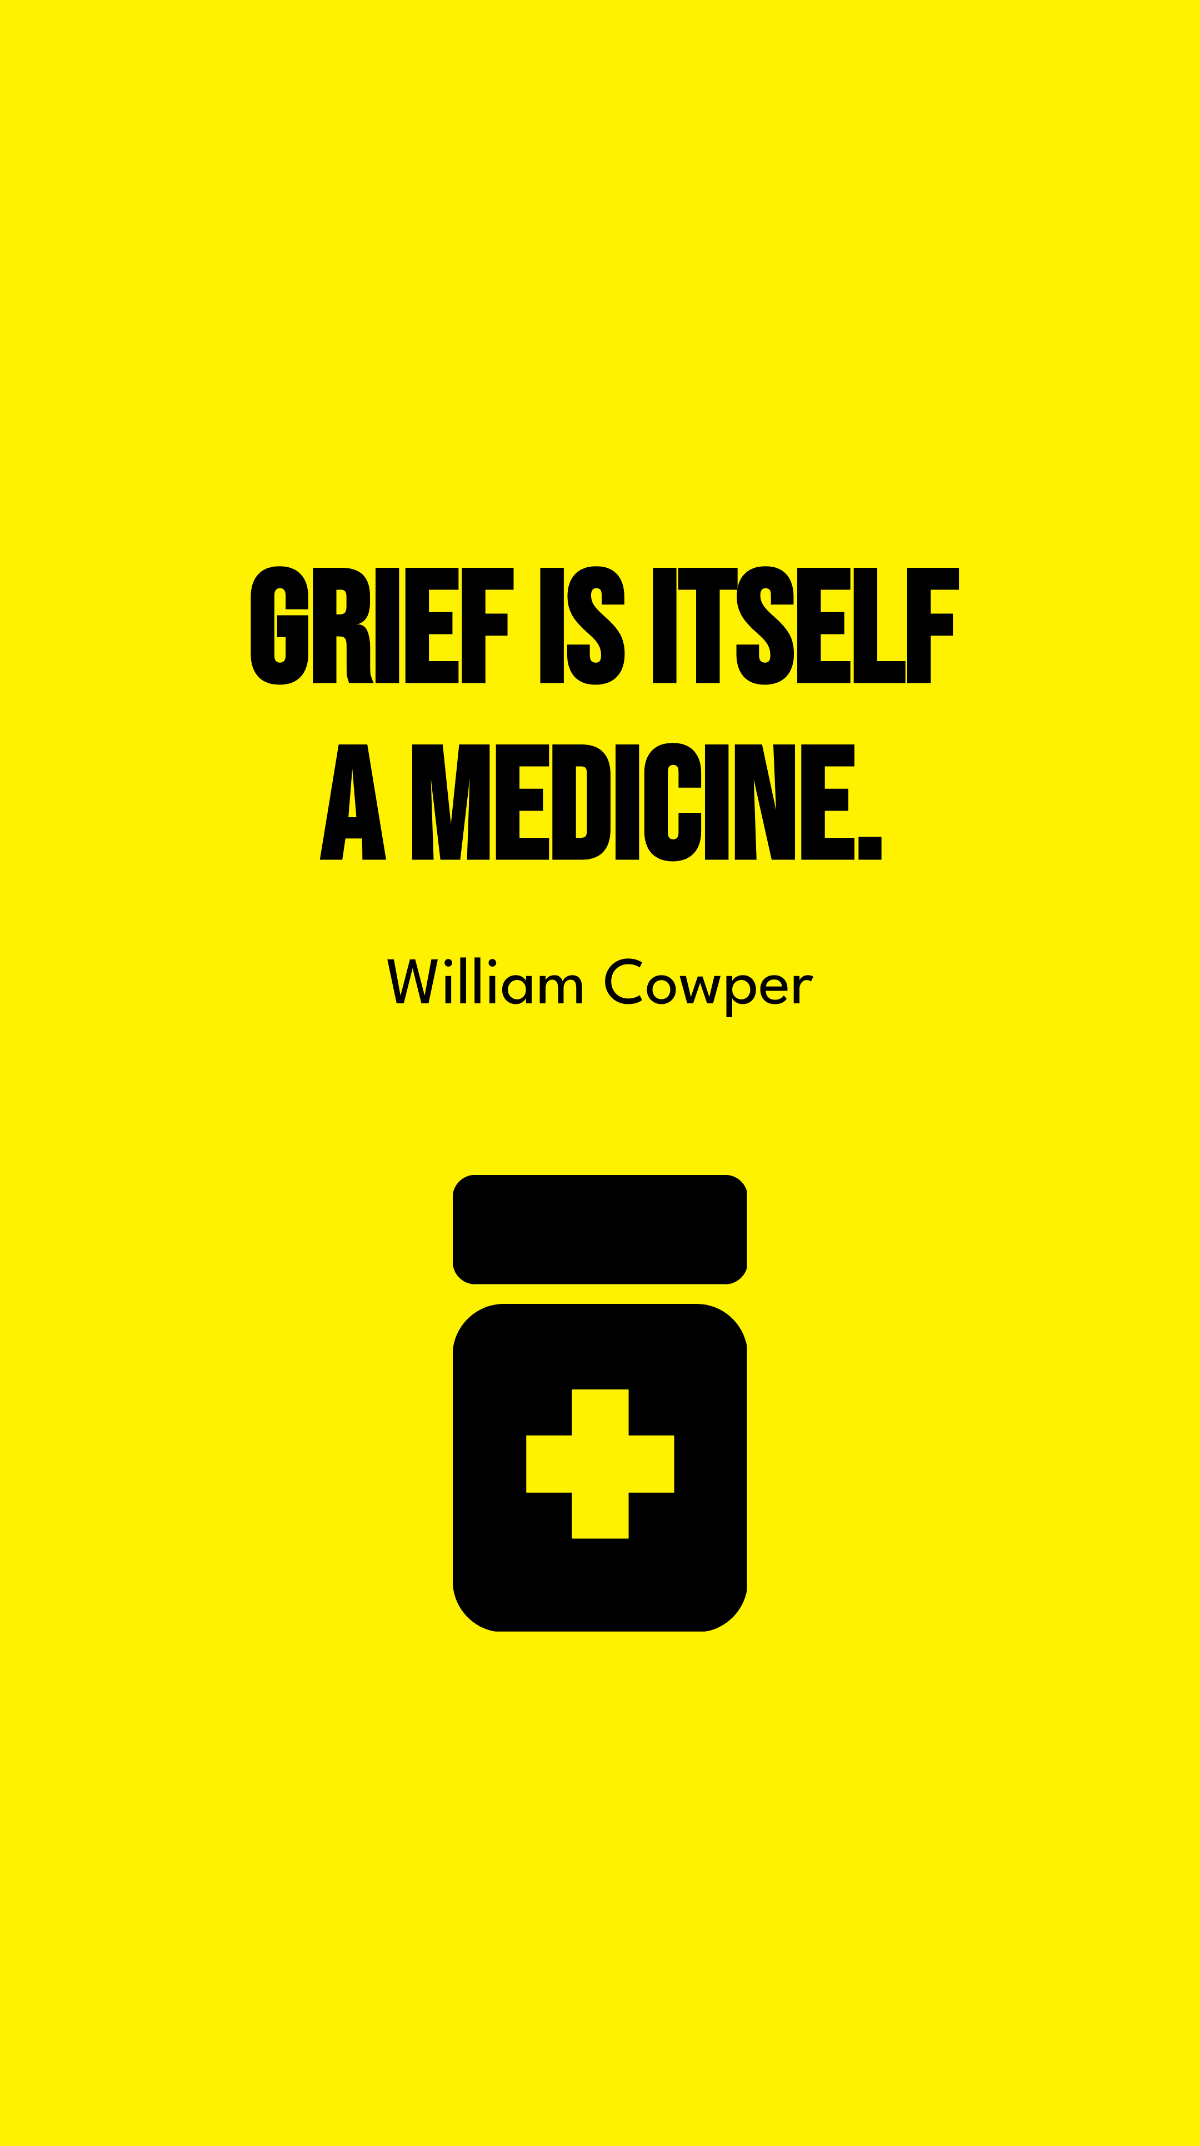 Free William Cowper - Grief is itself a medicine. Template